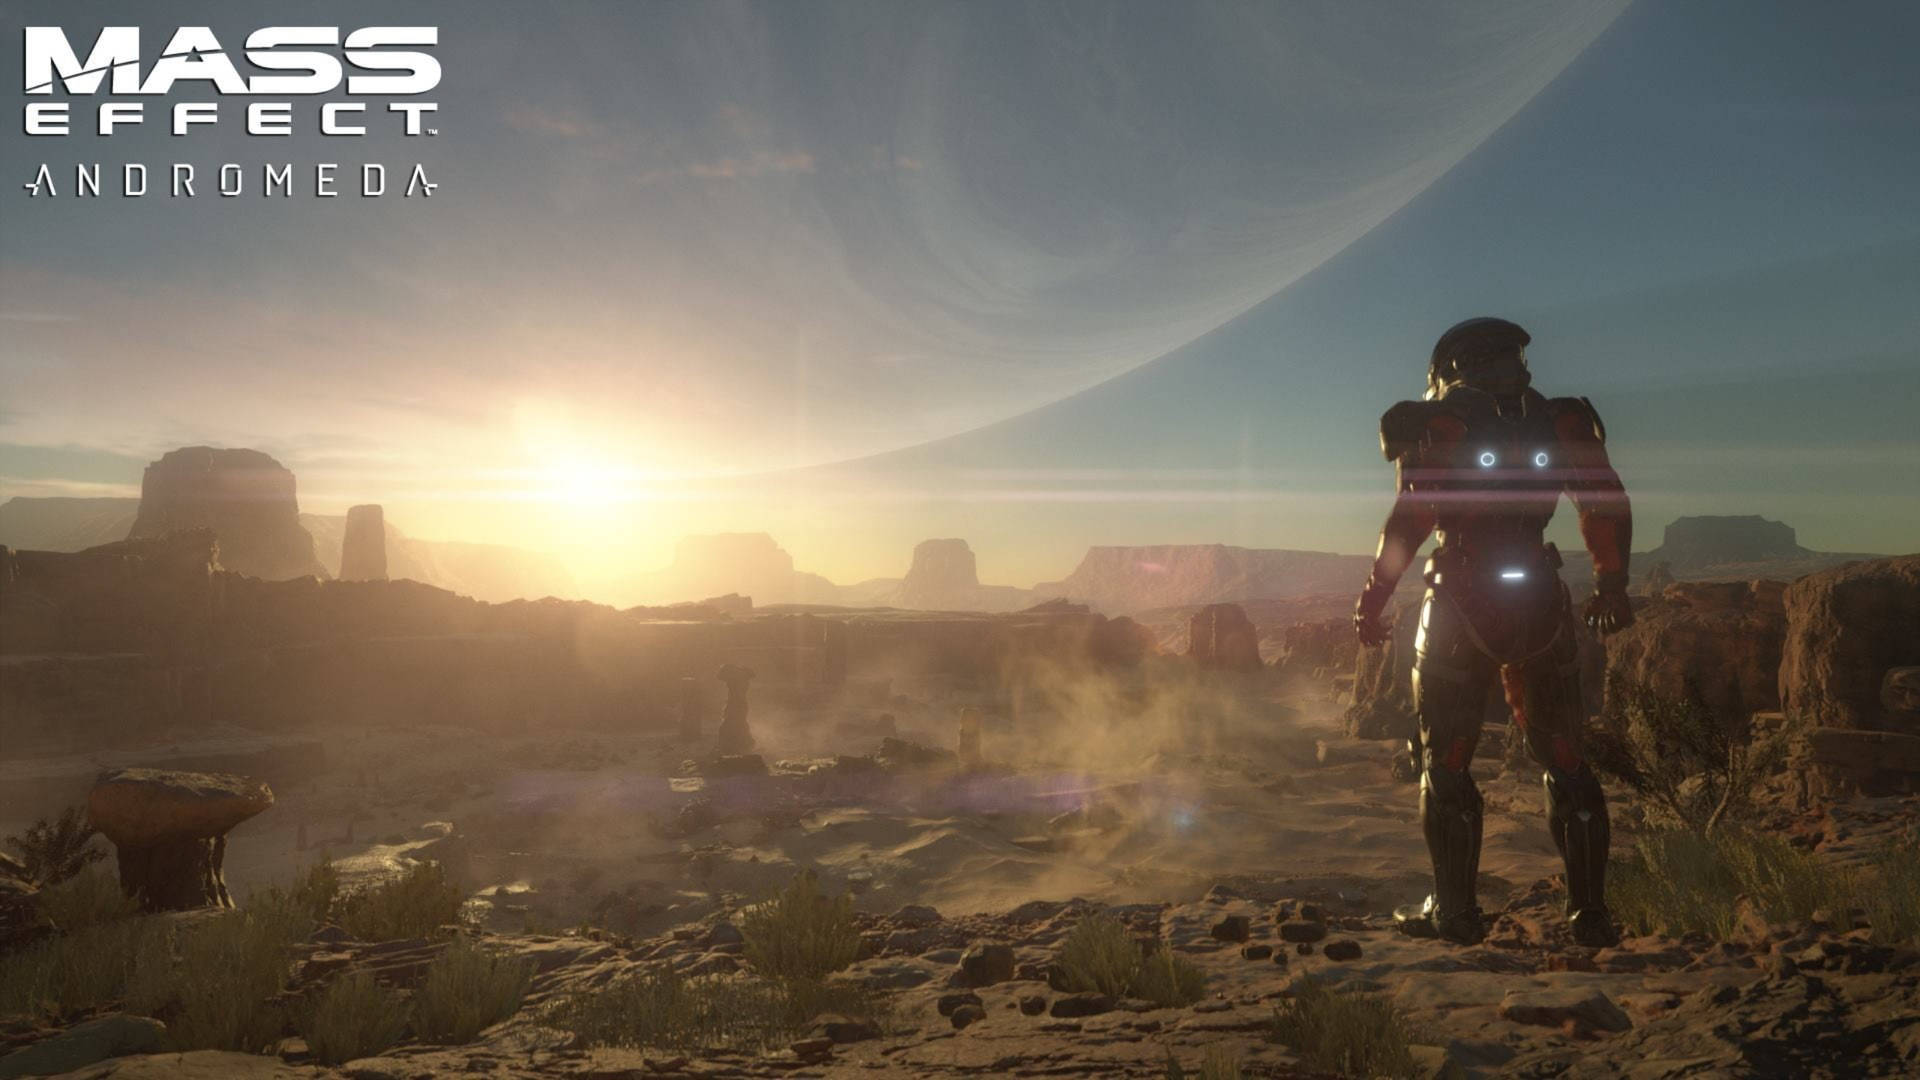 Mass Effect Andromeda Suit With Sunset Wallpaper